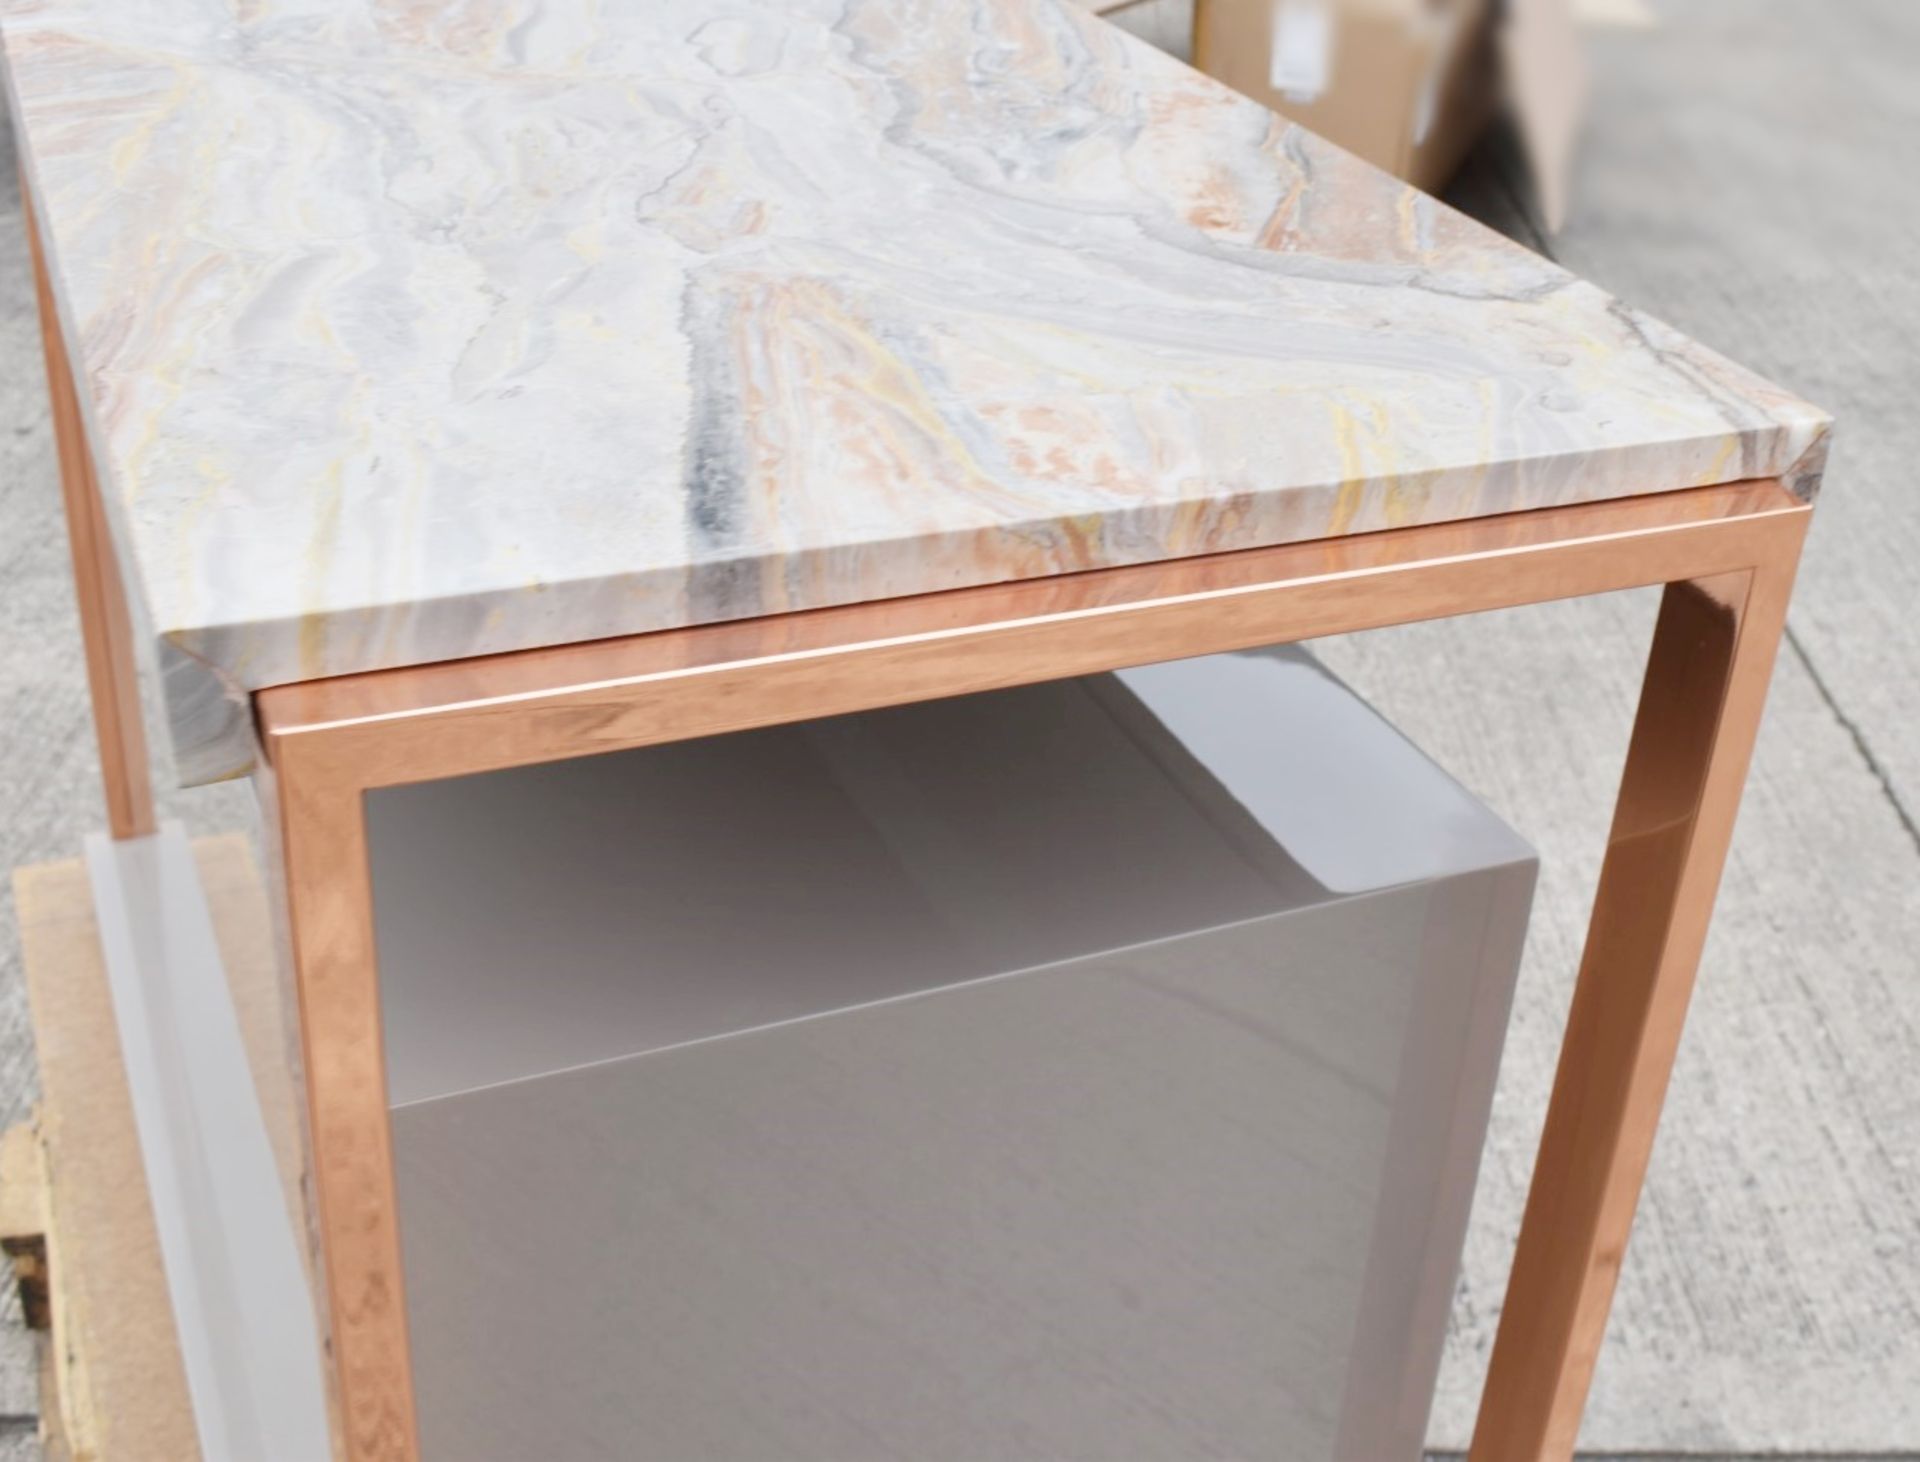 1 x FRATO 'LEXTON' Luxury Custom Ordered Marble Topped Chest of Drawers With Rose Gold Detail - Image 2 of 18